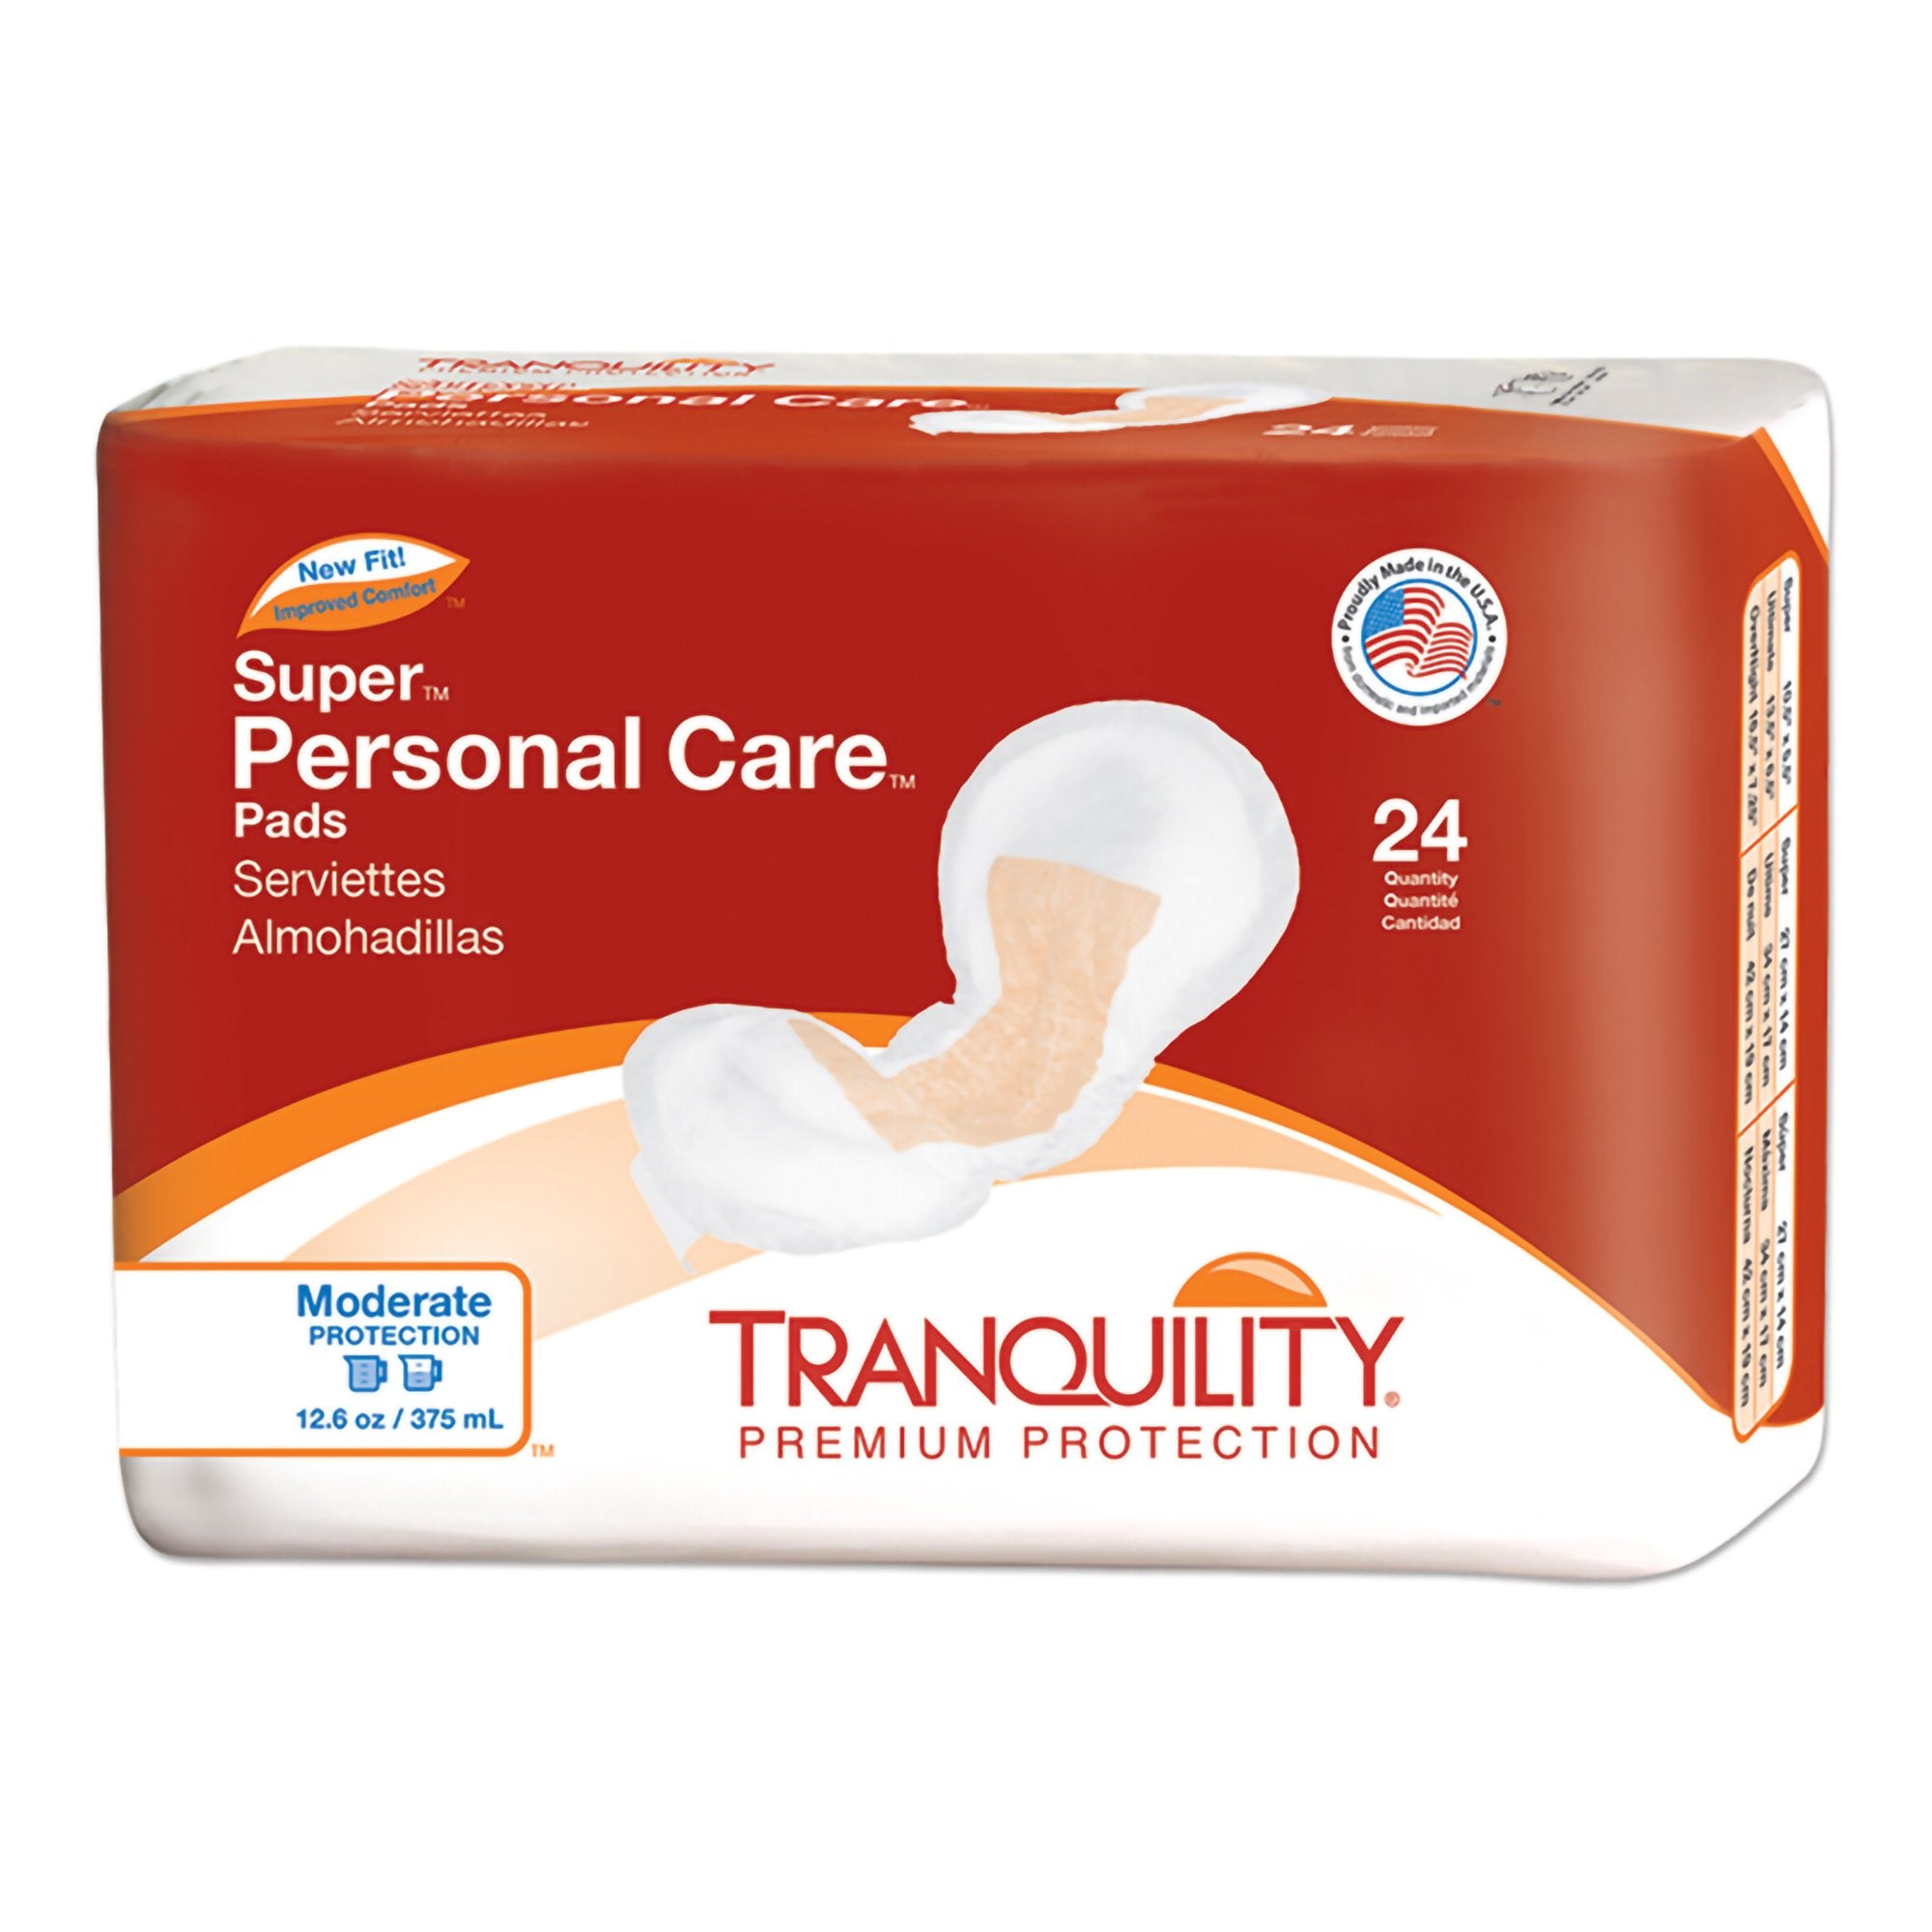 Bladder Control Pad Tranquility® 5-1/2 X 10-1/2 Inch Light Absorbency Superabsorbant Core One Size Fits Most